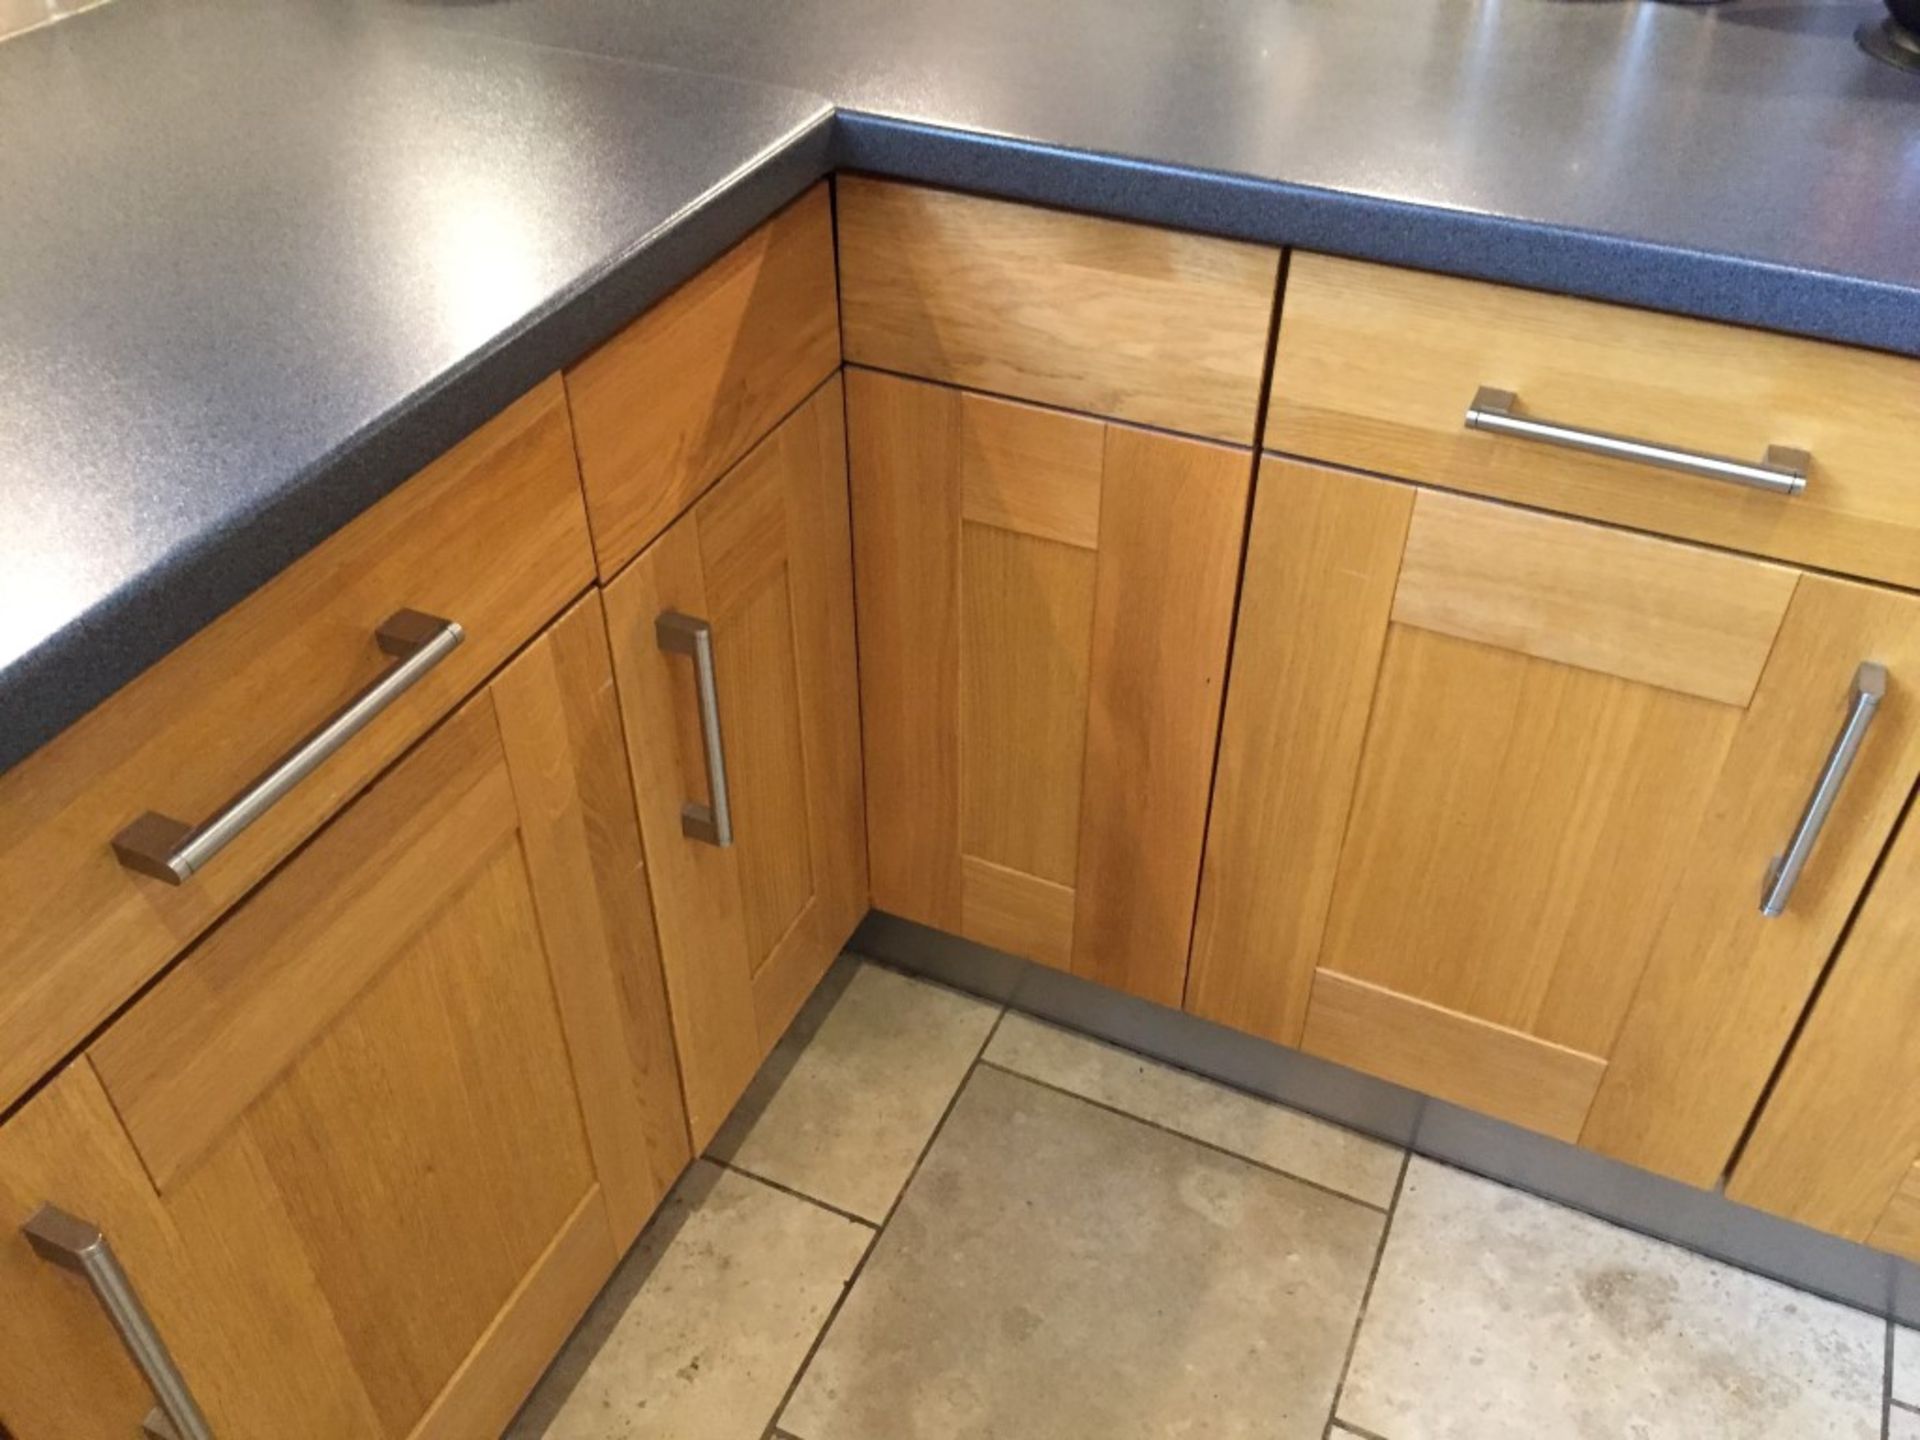 1 x Solid Wood Kitchen By English Rose With Breakfast Bar/Central Island Unit, Laminate Worktops And - Image 28 of 40